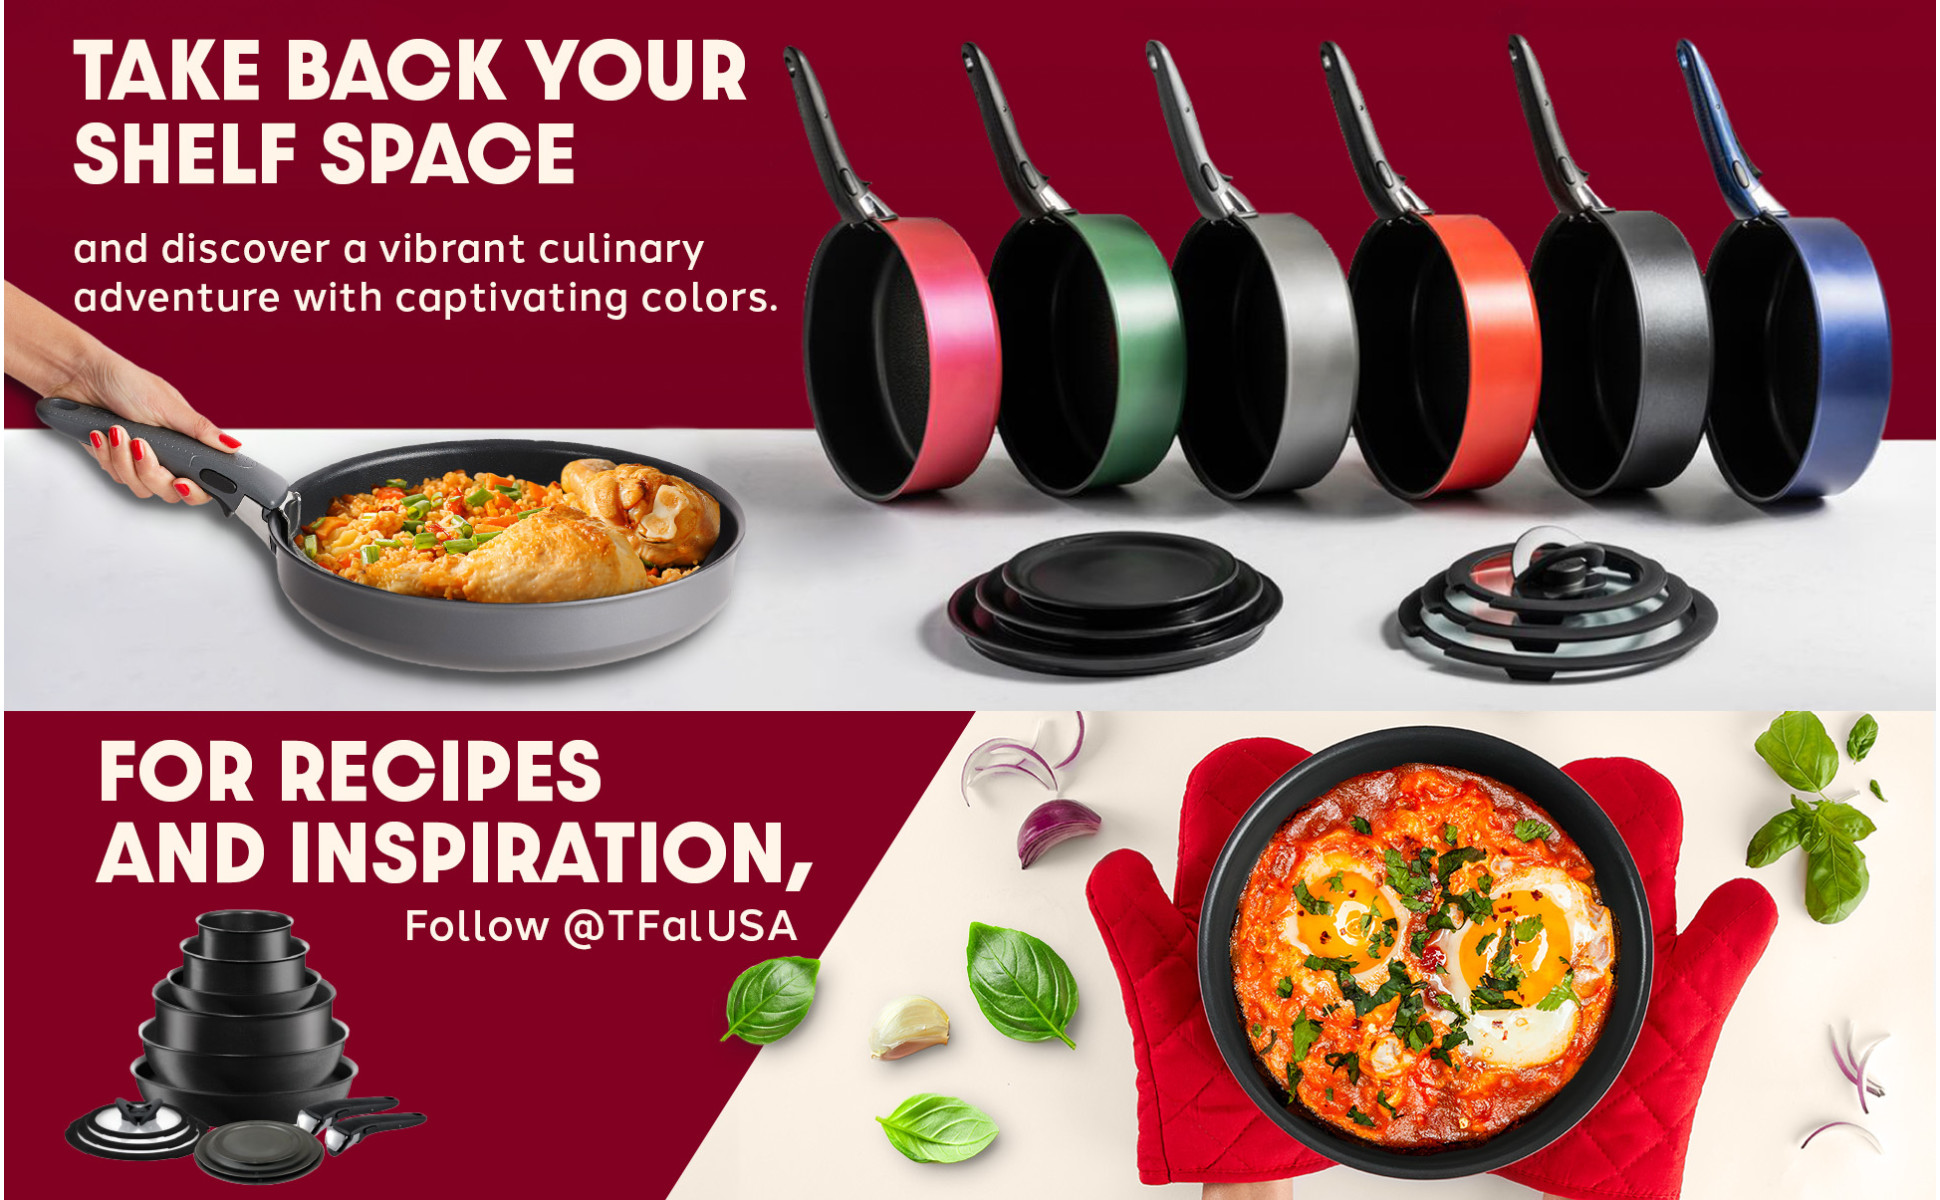 T-Fal Ingenio Nonstick Cookware Set 8 Piece Induction Oven Broiler Safe 500F Cookware, Pots and Pans, Oven, Broil, Dishwasher Safe, Black